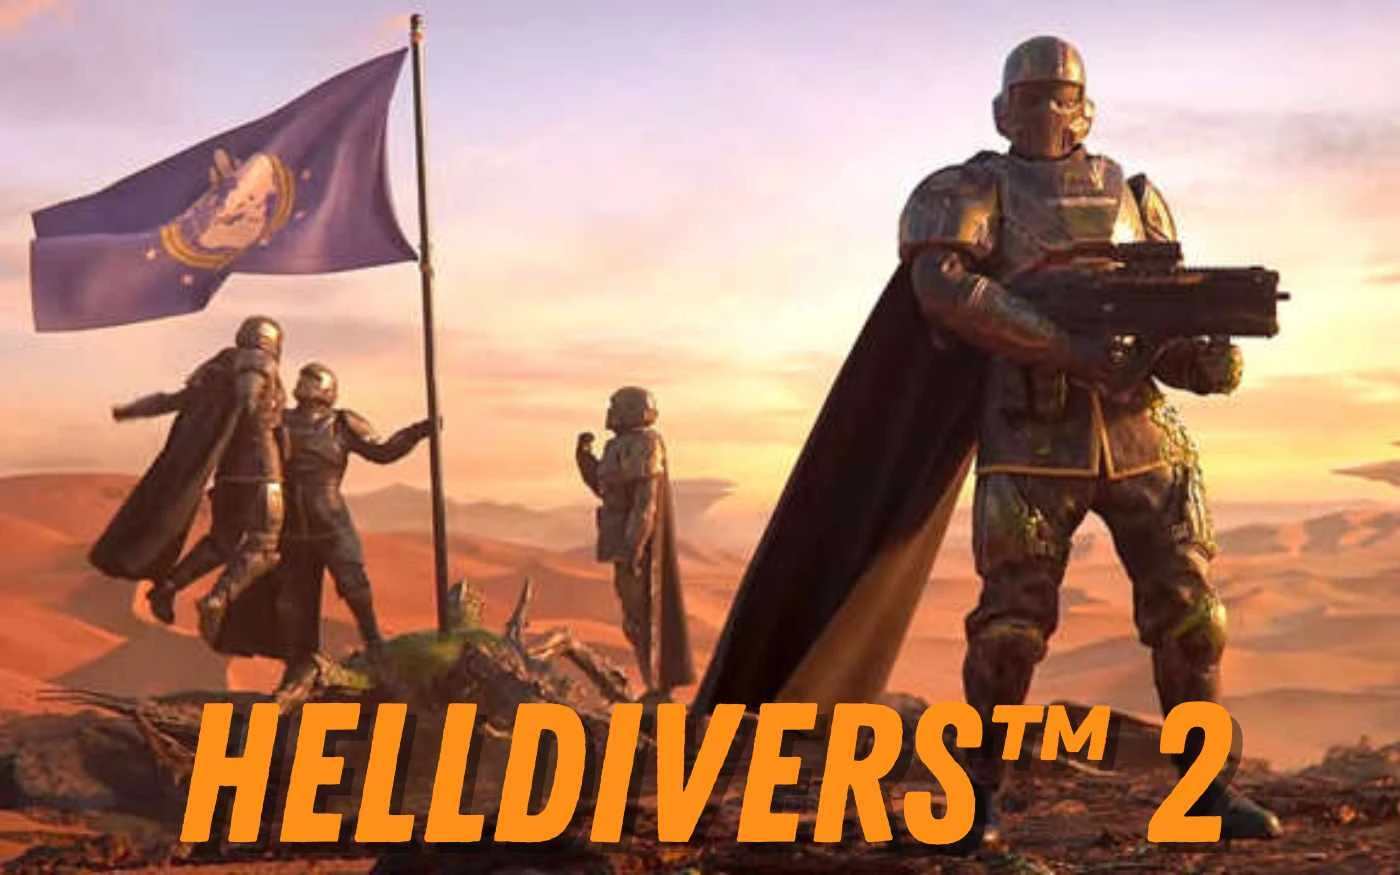 Helldivers 2 Parents Guide (Video Game)